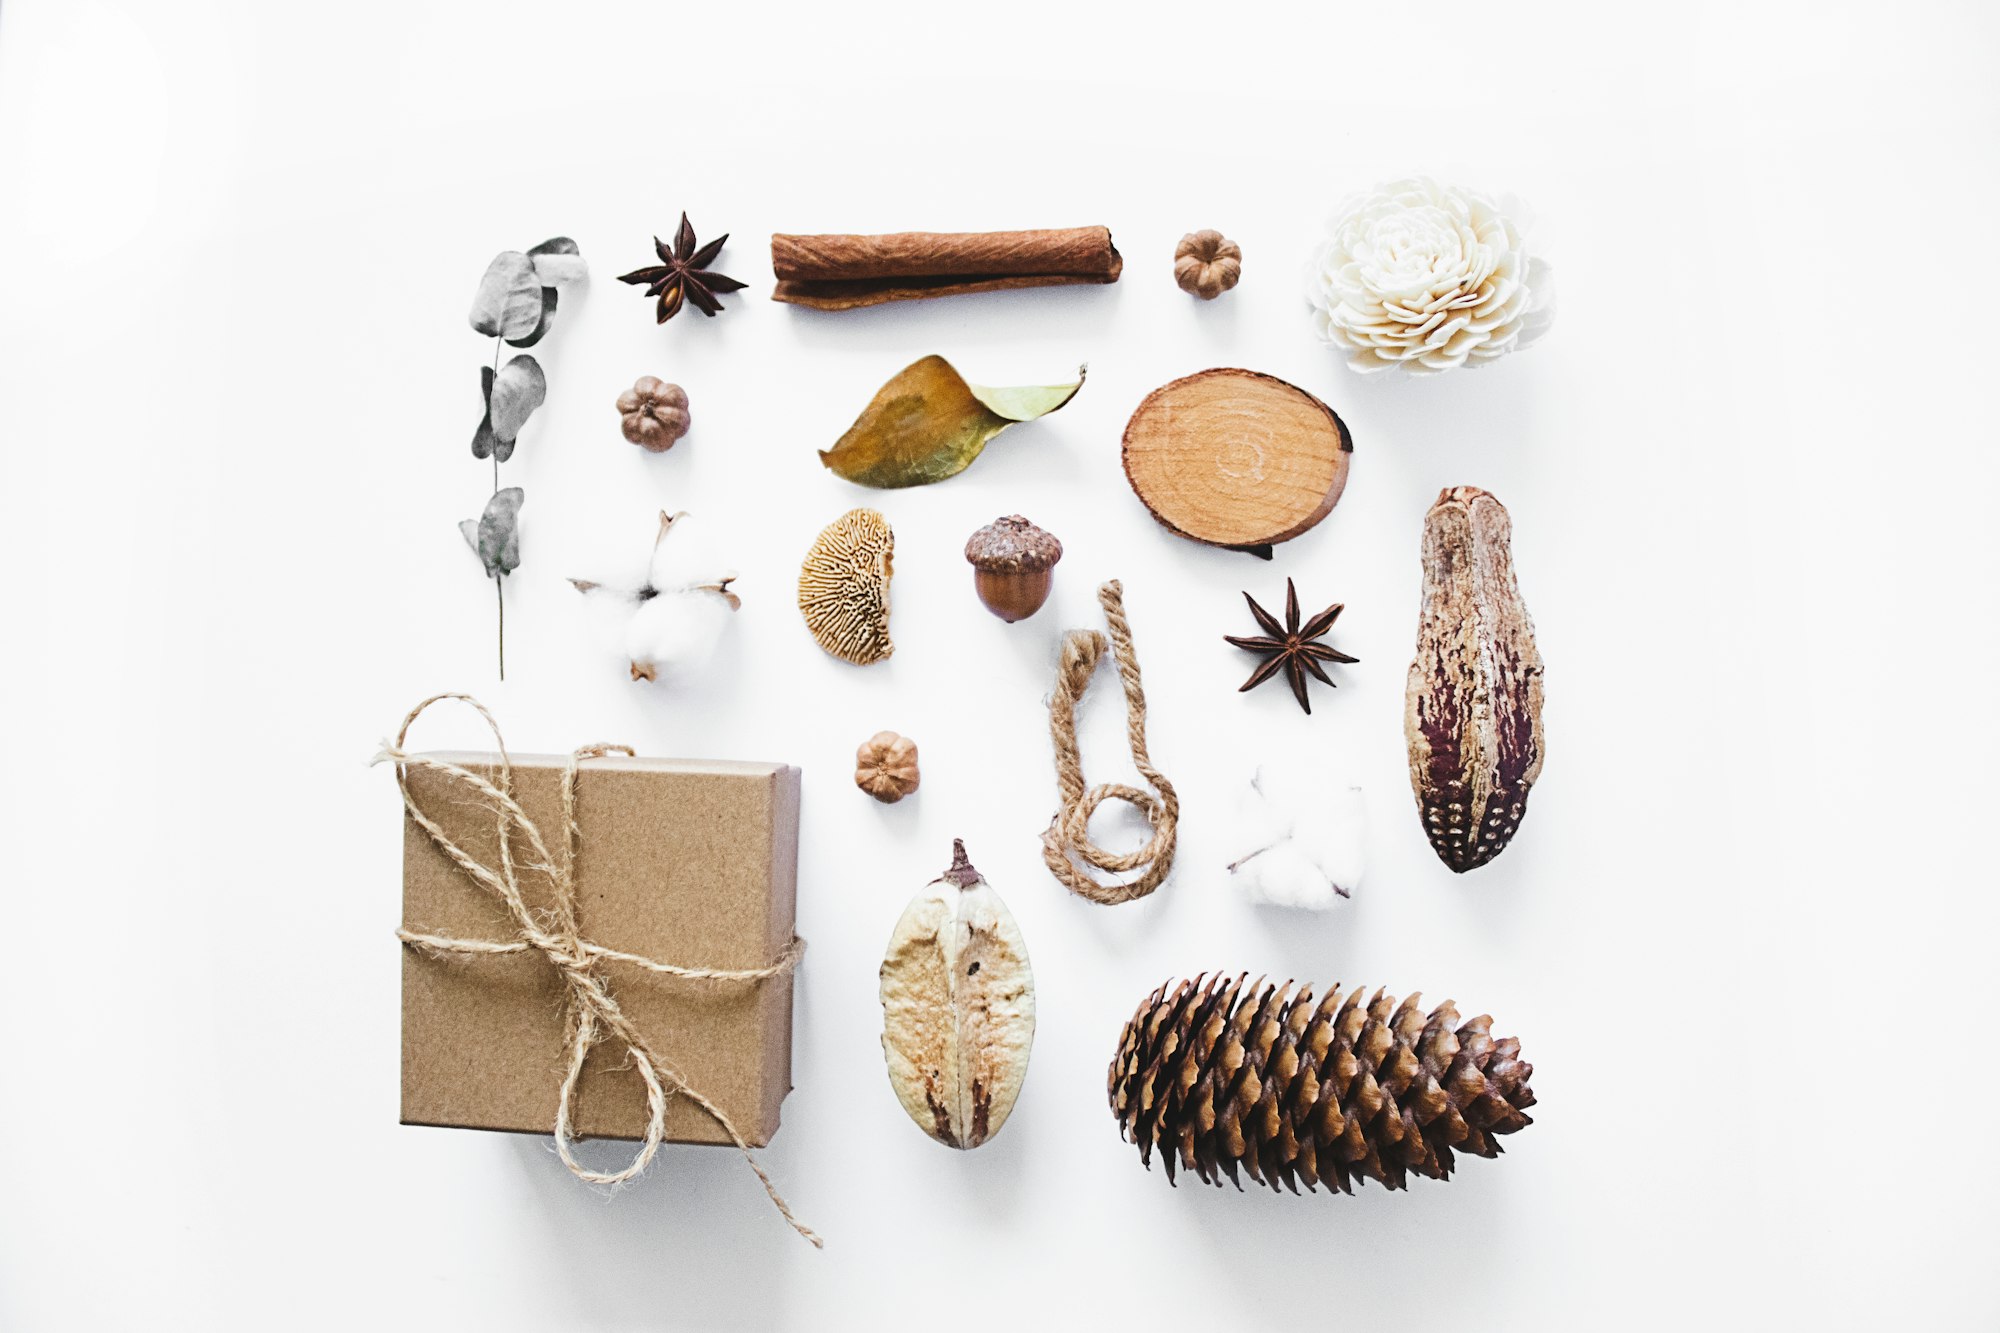 Dried autumn leaves, flowers, cotton bud, acorn, box and pinecone on white background